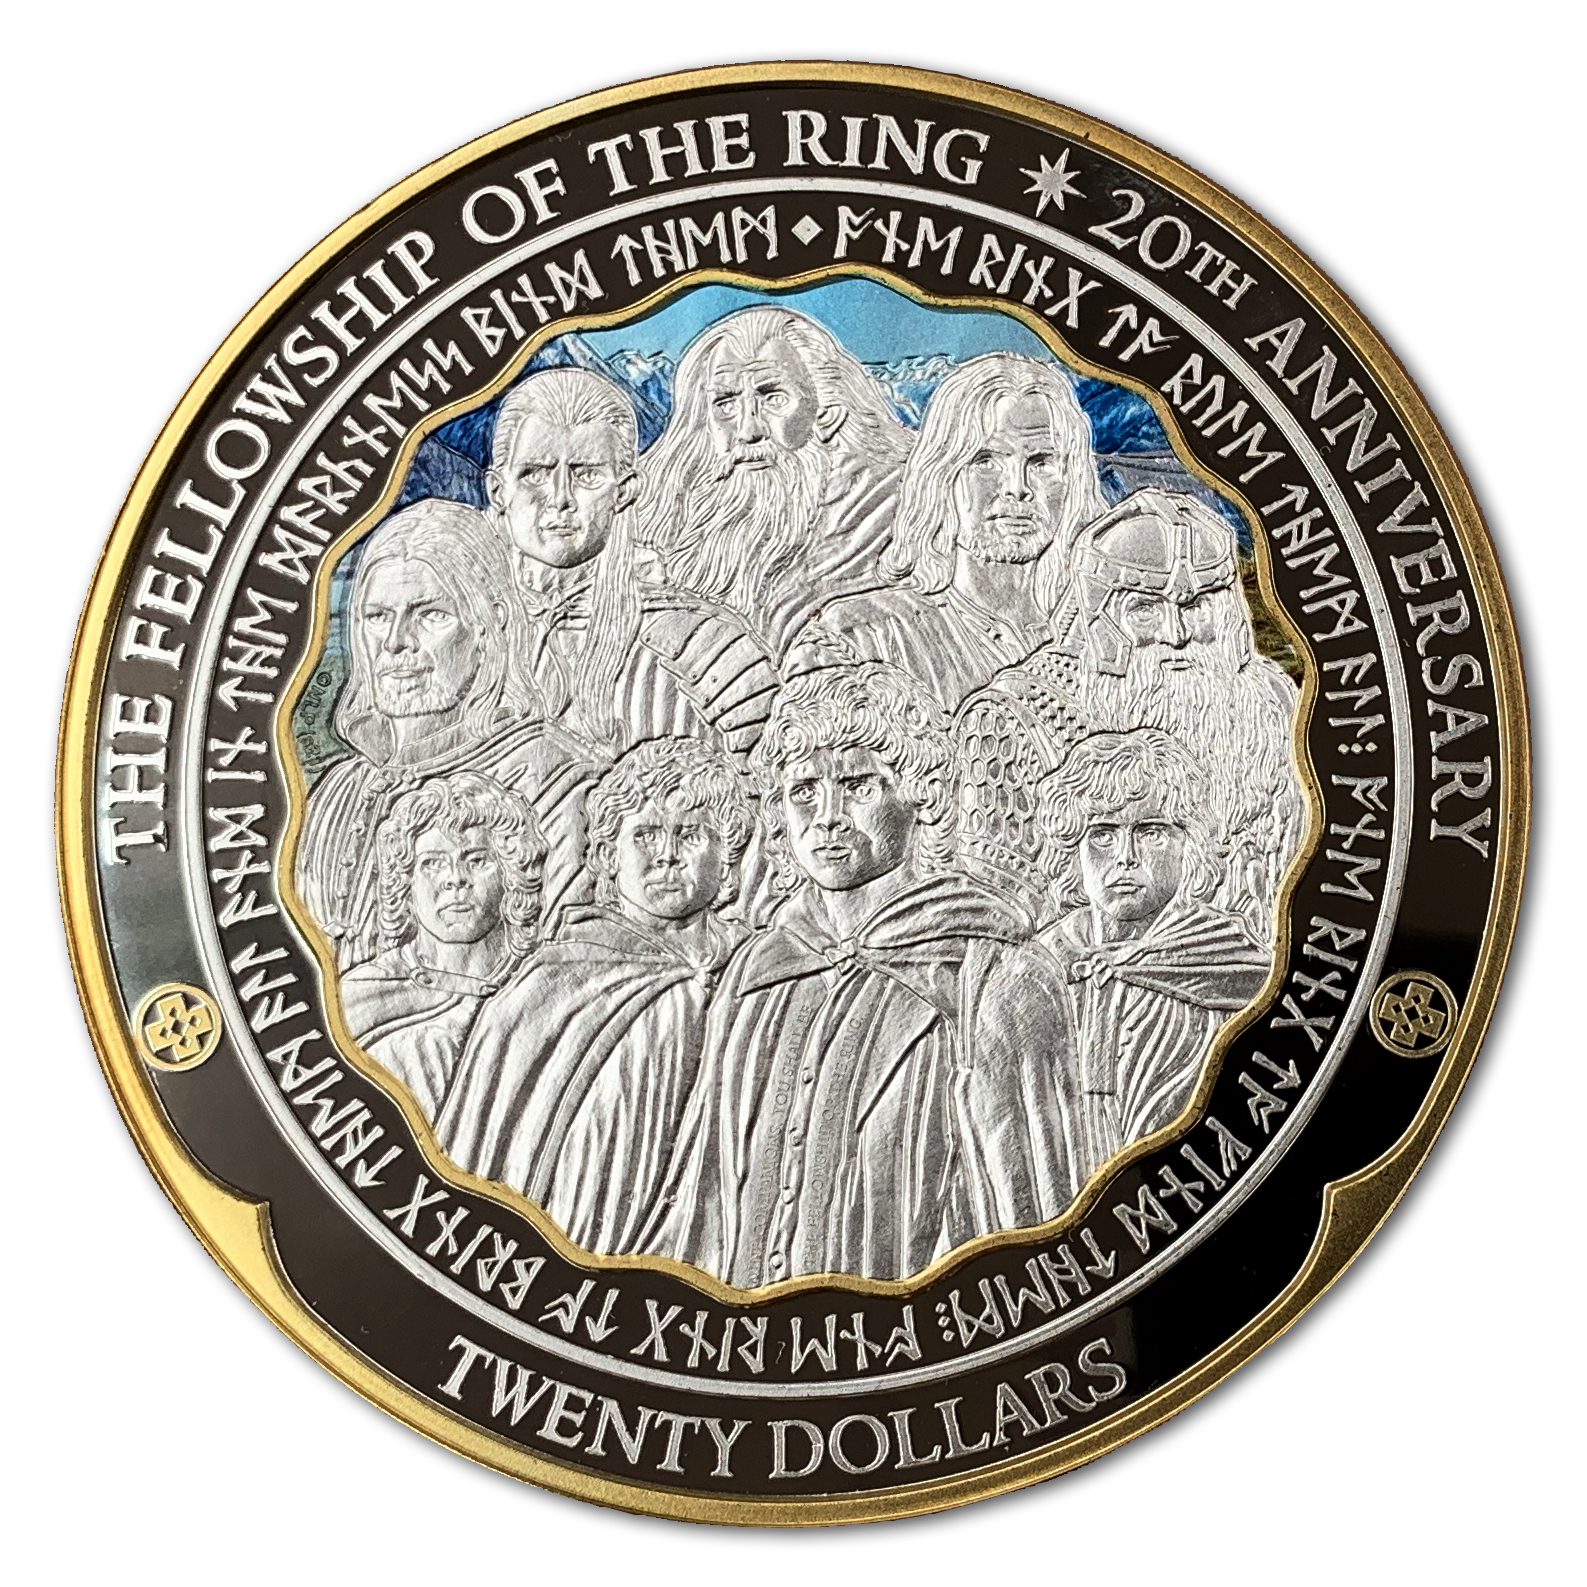 LOTR Coin Fellowship of the Ring